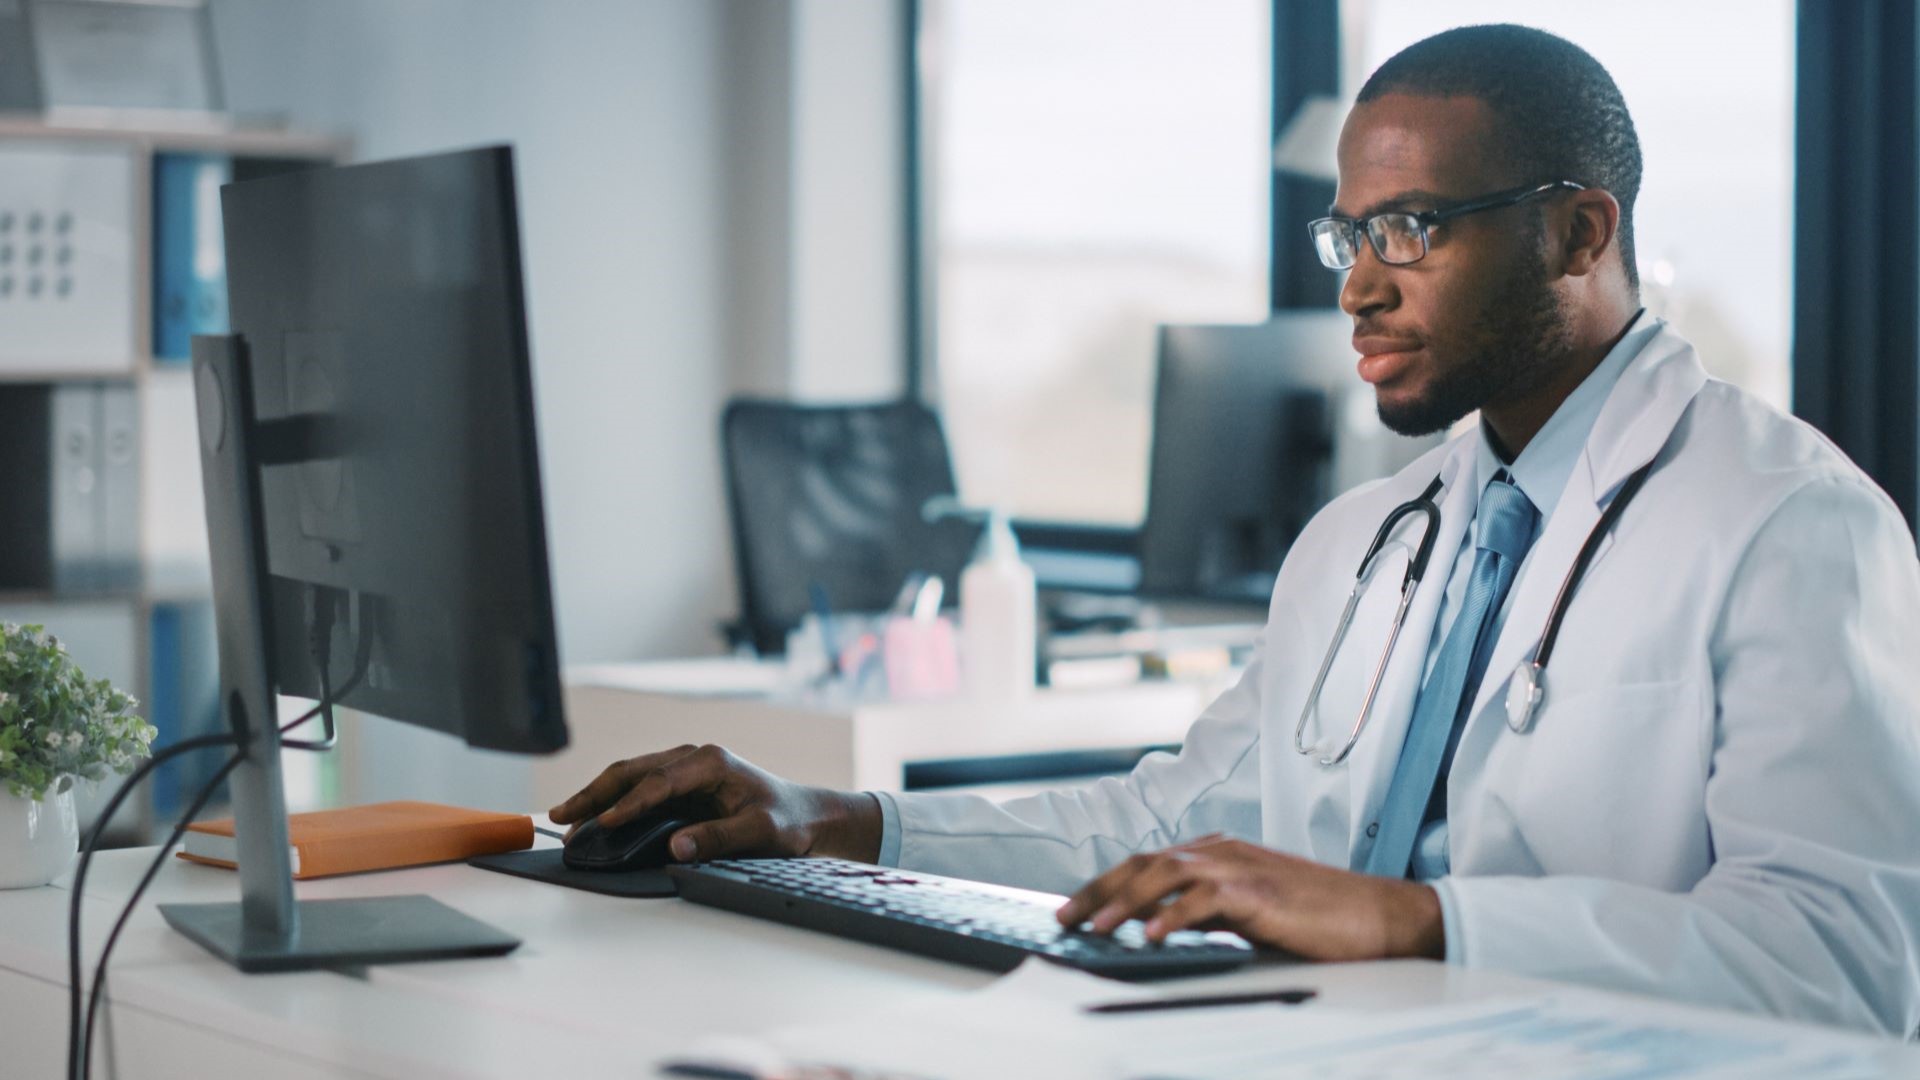 A doctor looks seriously at a computer screen while holding keyboard and mouse.